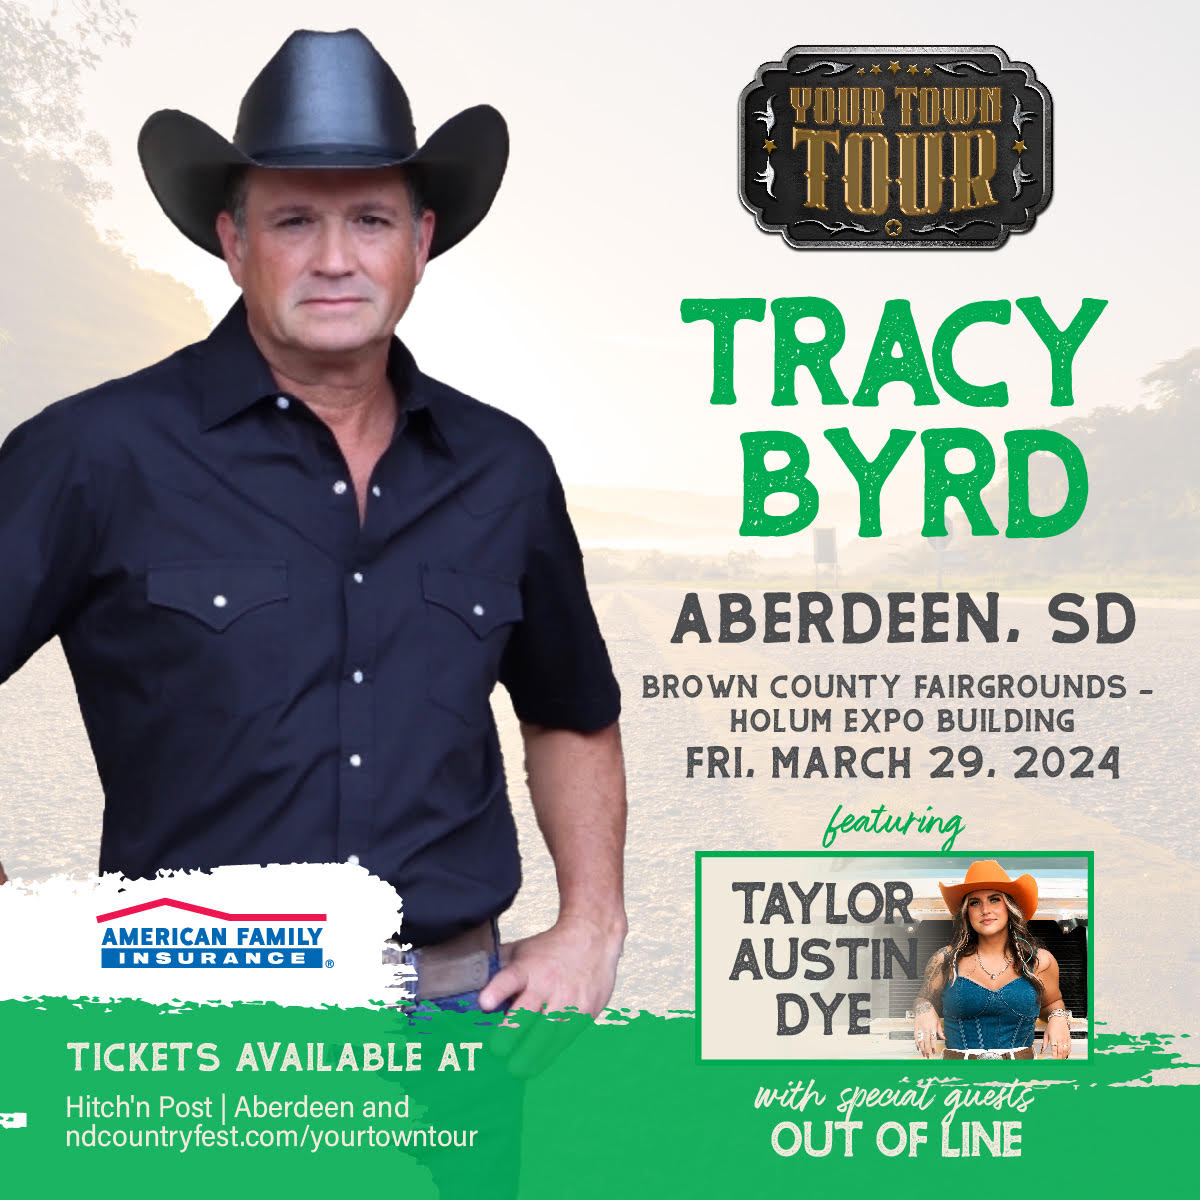 Tracy Byrd VIP Concert Tickets Aberdeen, SD March 29, 2024